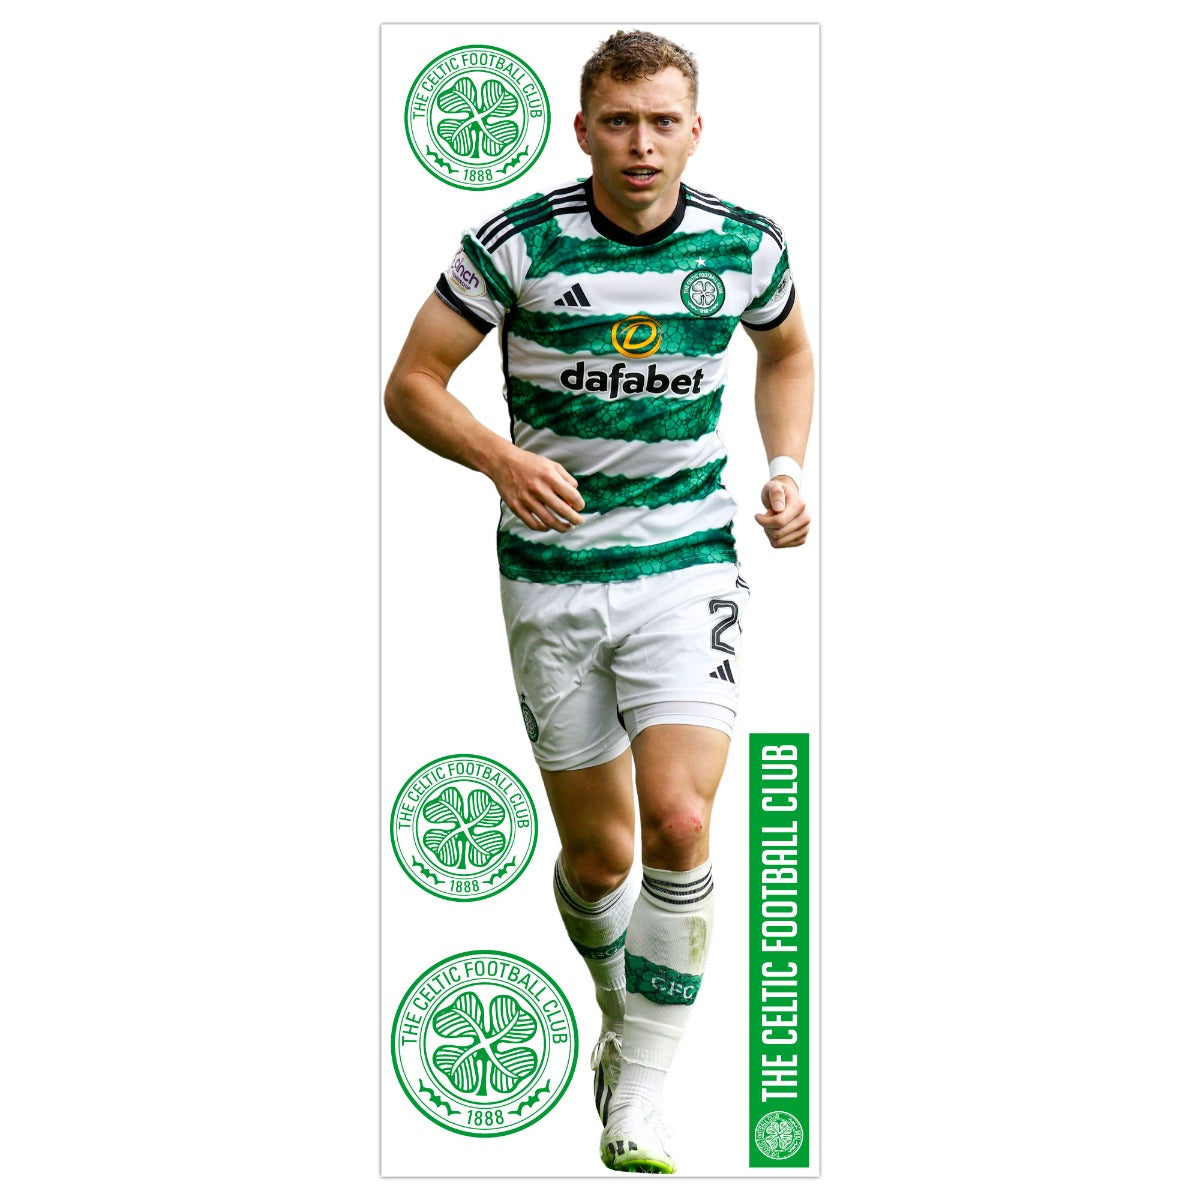 Celtic FC Wall Sticker - Johnston 23/24 Action Player Wall Decal